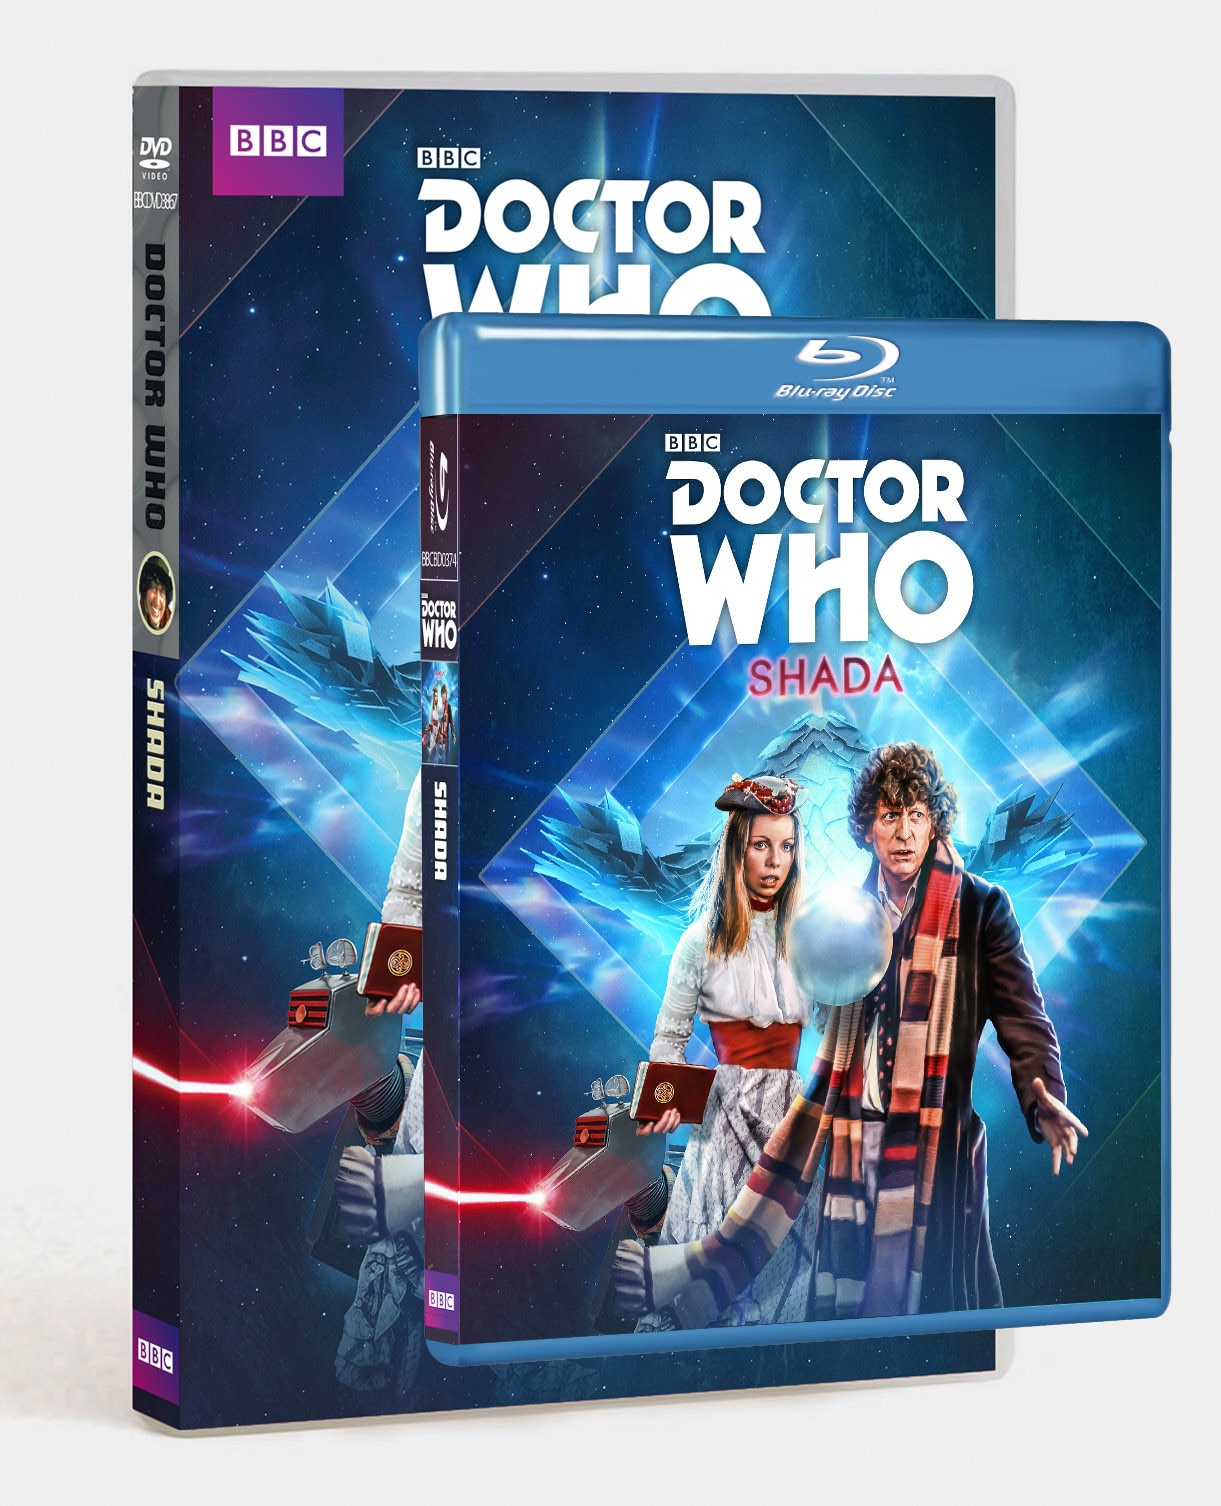 Image of Shada DVD and blu-ray with The Fourth Doctor, Romana 2 and K-9 on the front